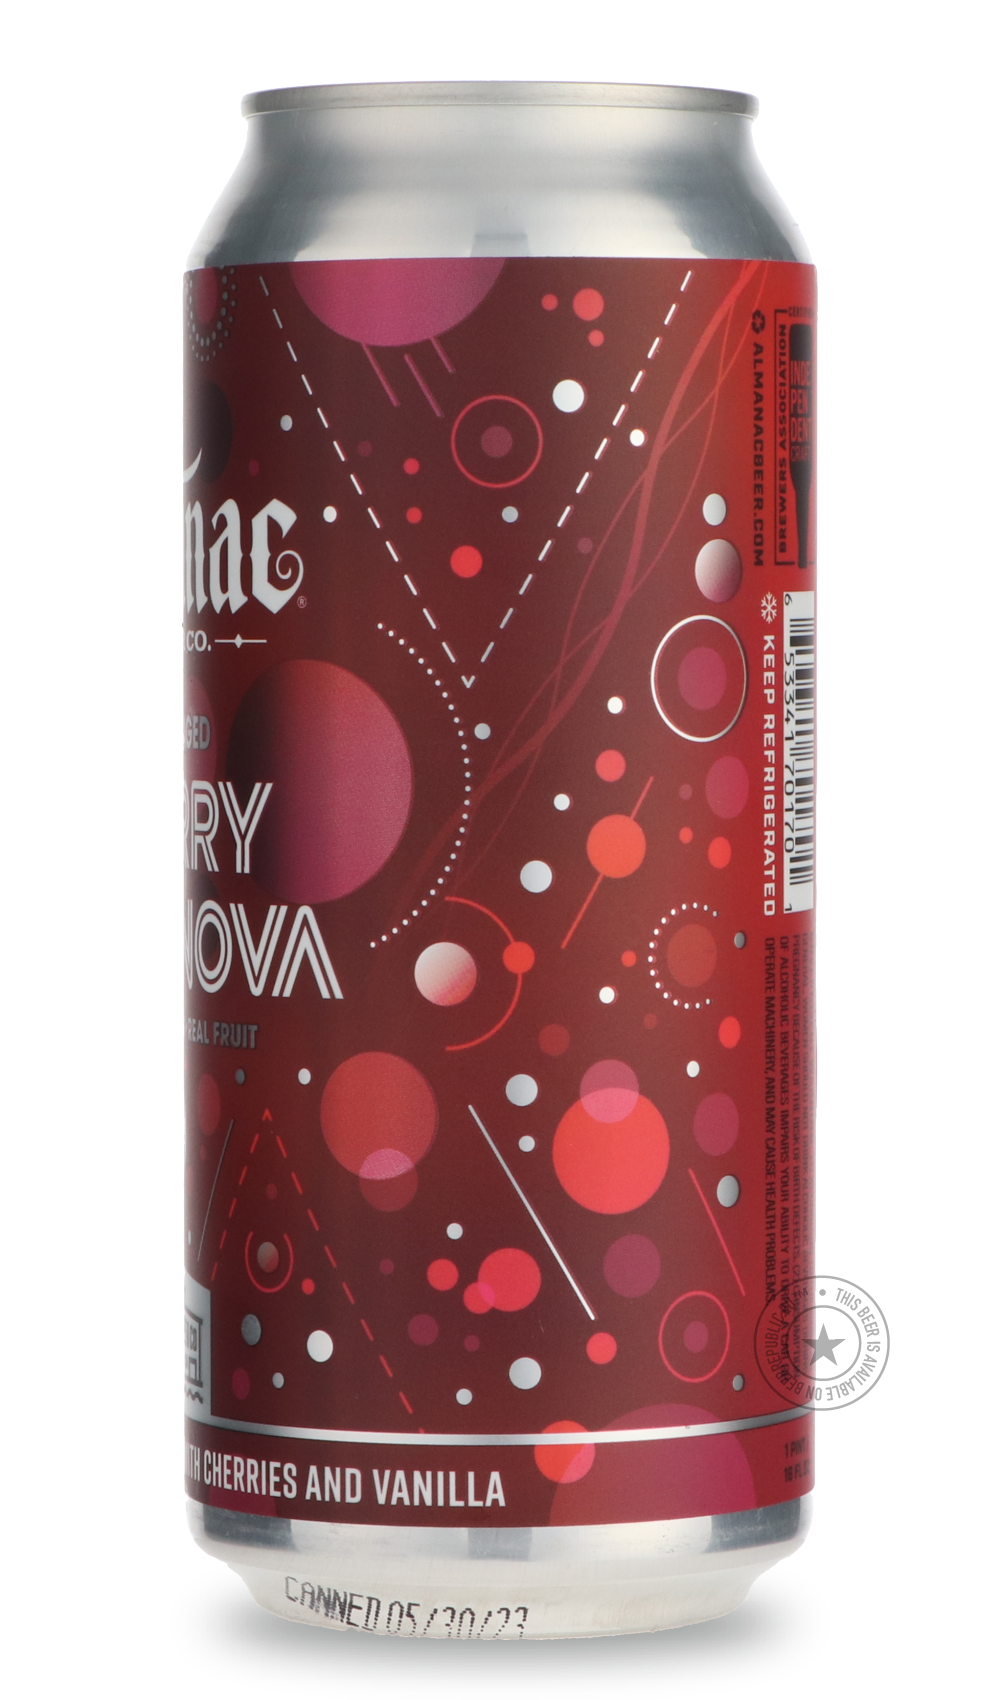 -Almanac- Cherry Sournova-Sour / Wild & Fruity- Only @ Beer Republic - The best online beer store for American & Canadian craft beer - Buy beer online from the USA and Canada - Bier online kopen - Amerikaans bier kopen - Craft beer store - Craft beer kopen - Amerikanisch bier kaufen - Bier online kaufen - Acheter biere online - IPA - Stout - Porter - New England IPA - Hazy IPA - Imperial Stout - Barrel Aged - Barrel Aged Imperial Stout - Brown - Dark beer - Blond - Blonde - Pilsner - Lager - Wheat - Weizen 